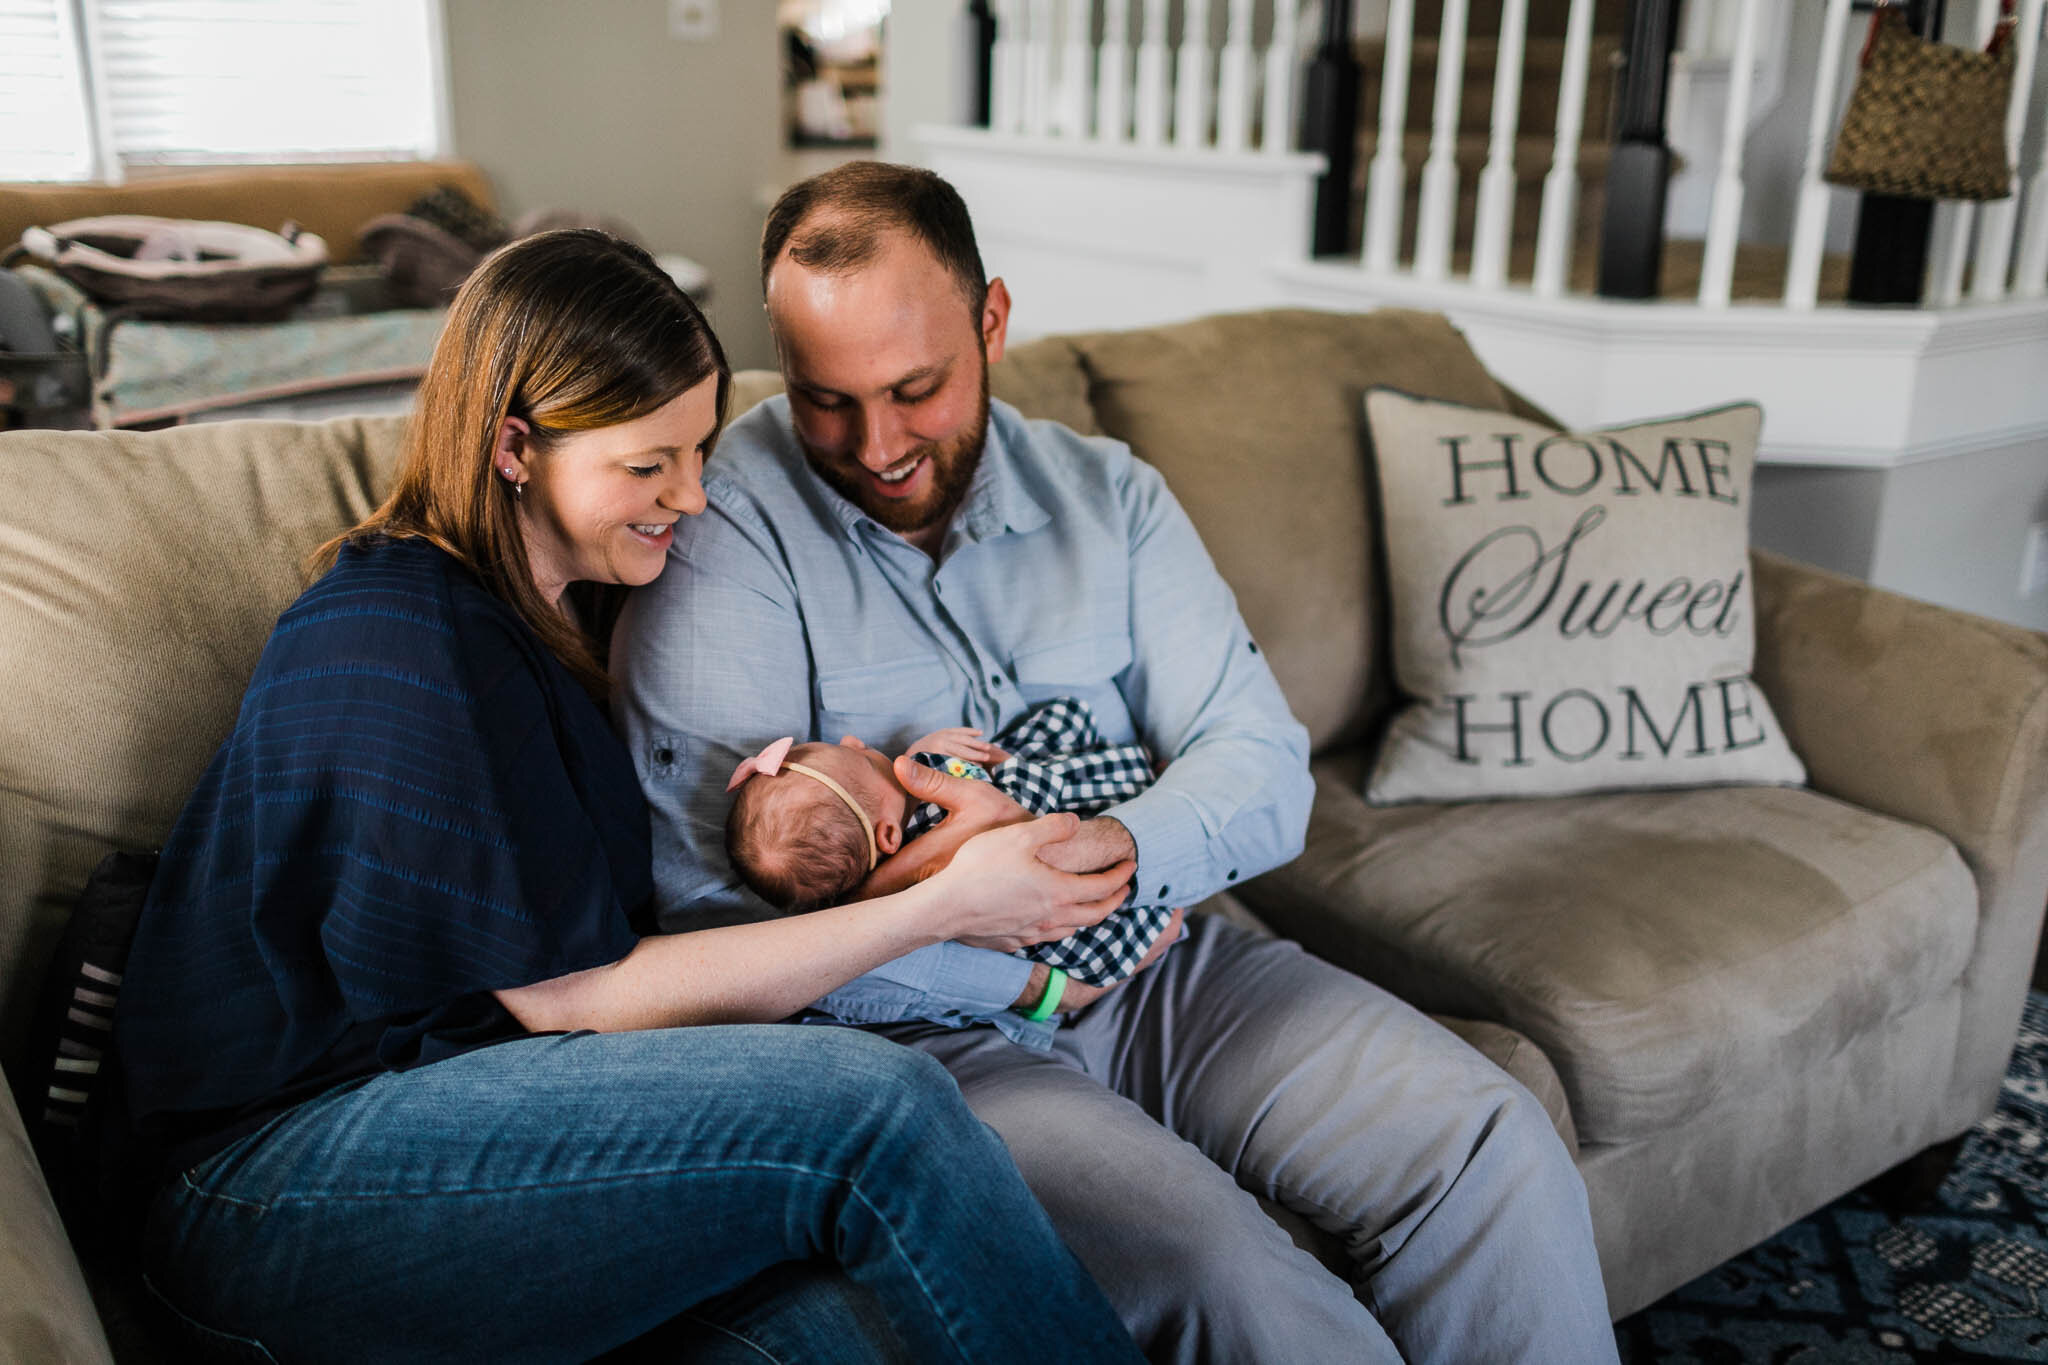 Raleigh Newborn Photographer | By G. Lin Photography | Parents smiling at baby on the couch